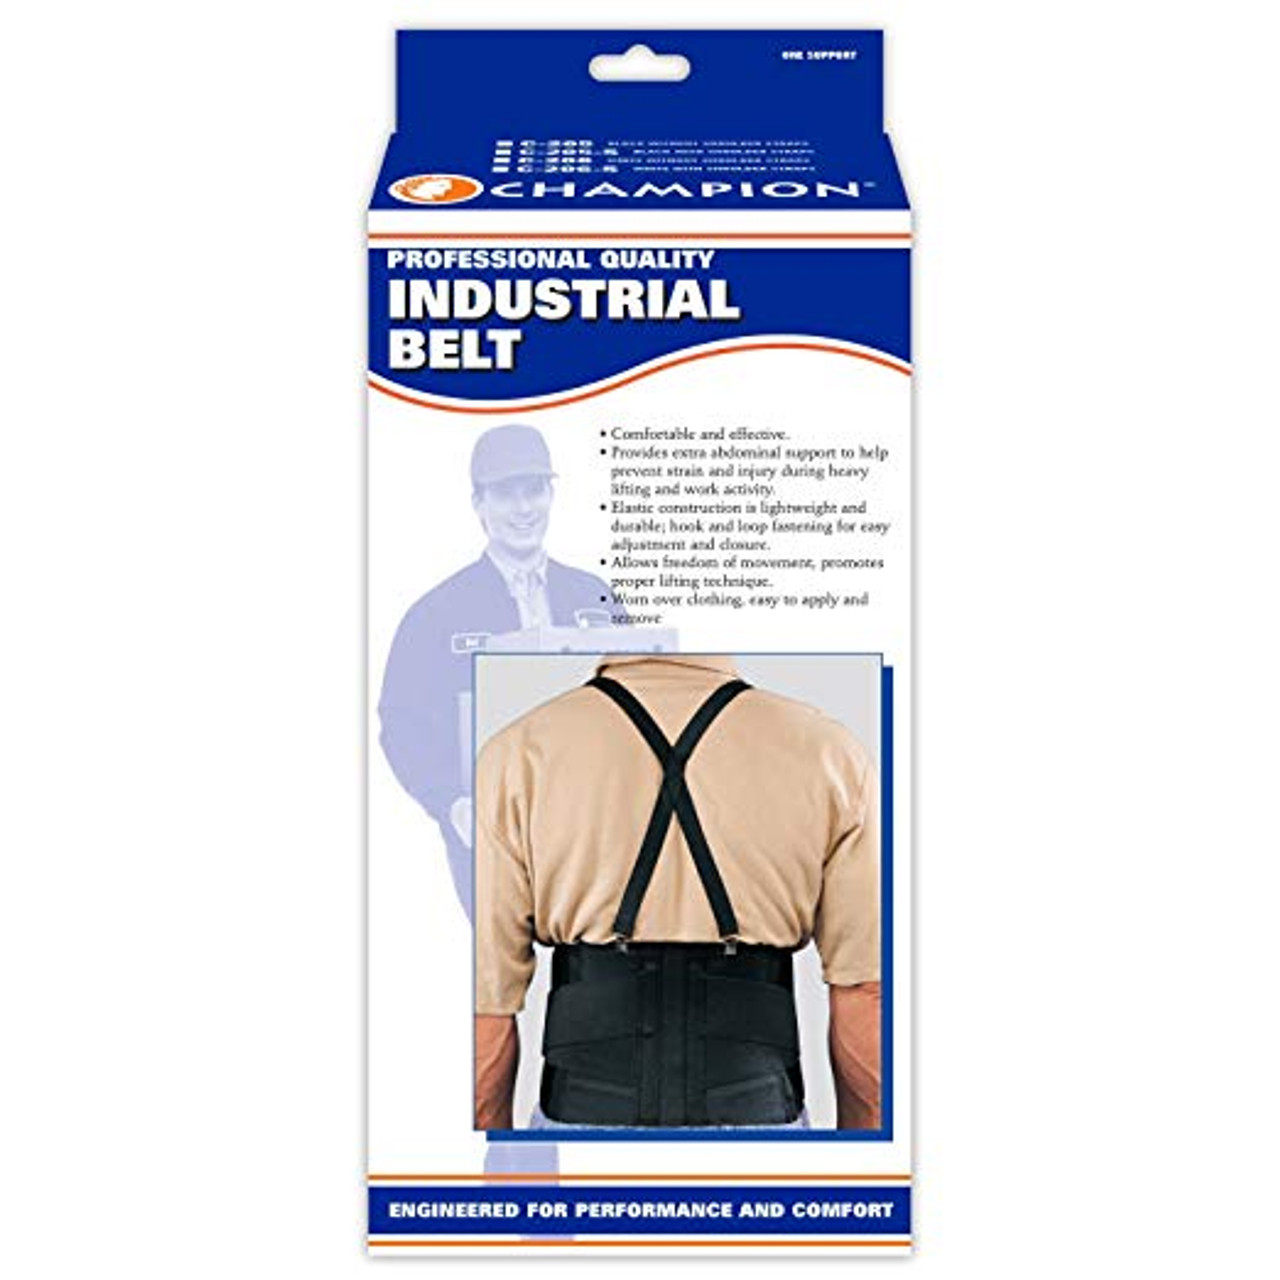 Champion C-207 Suspenders only for Industrial Belt - Black or White ONE SIZE (C-207) (Champion C-207)